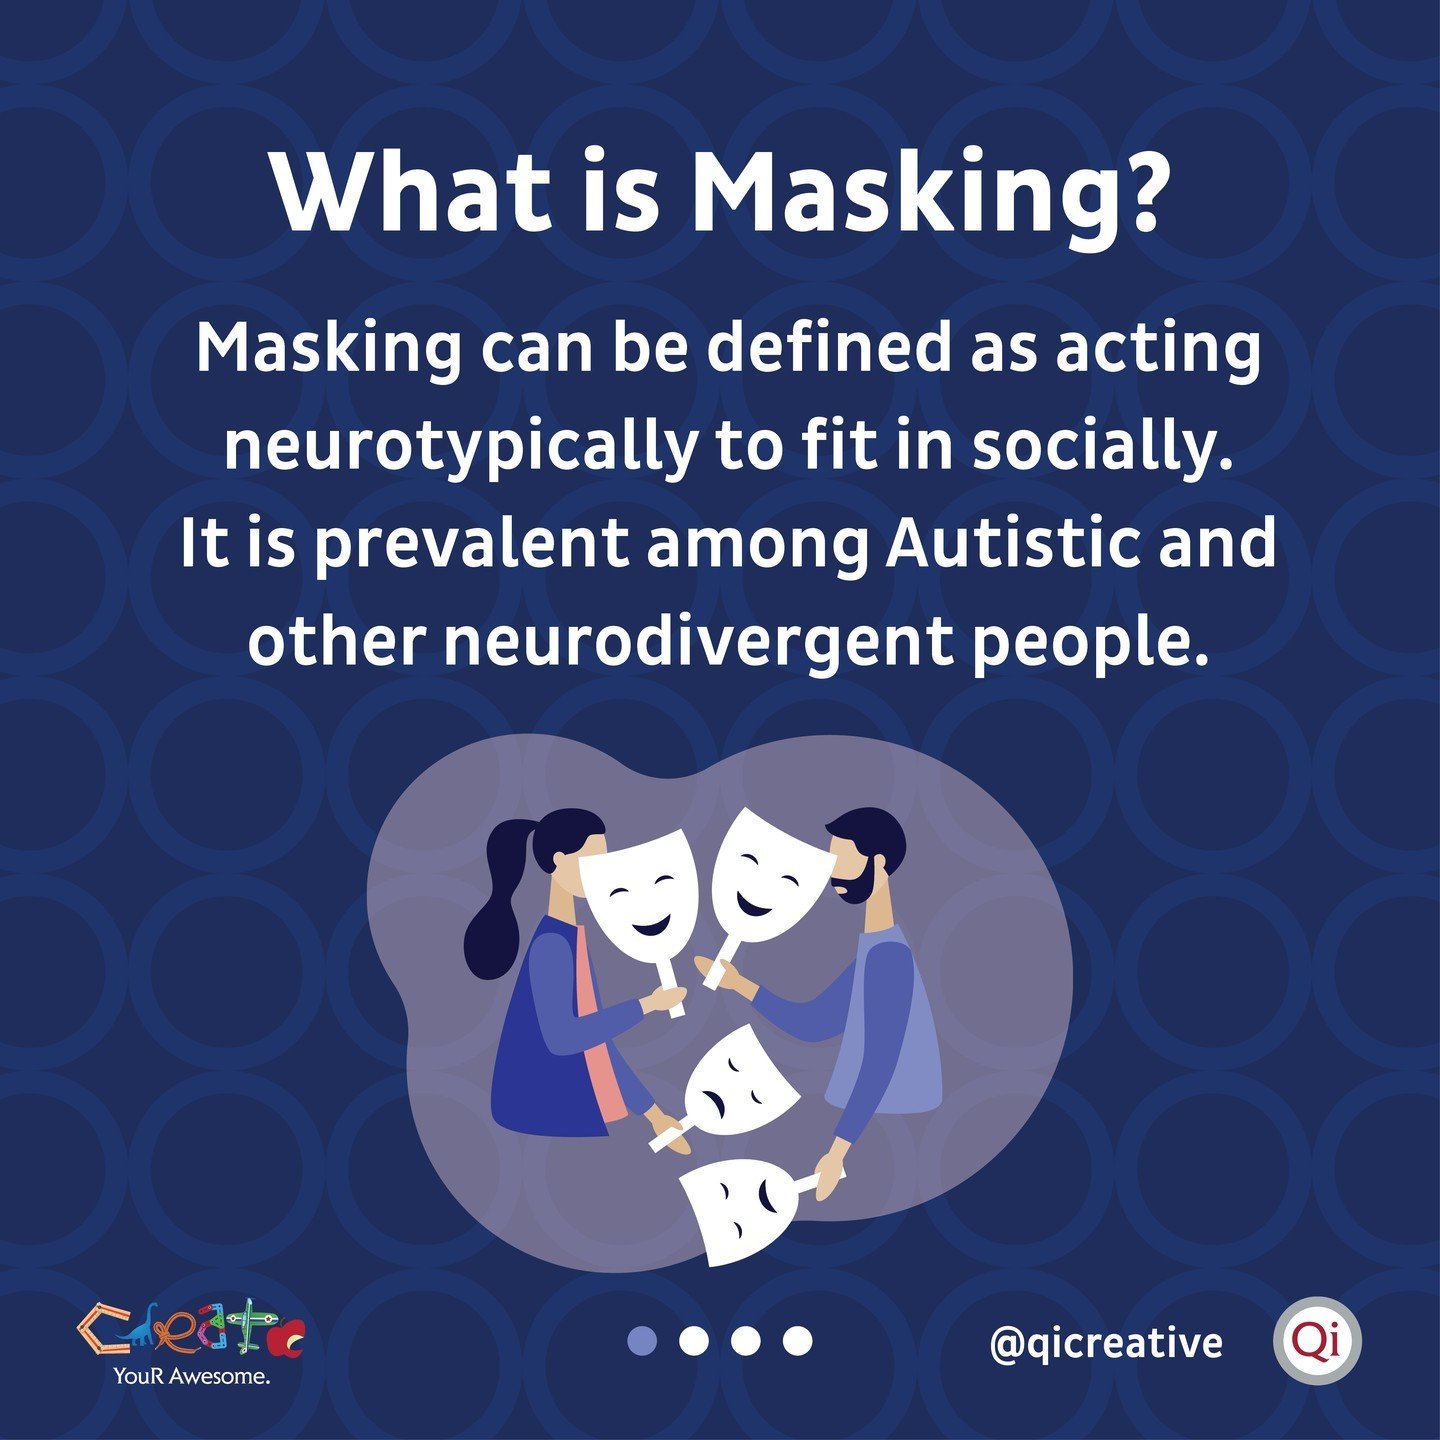 &quot;Masking&quot; can be defined as acting neurotypically to fit in socially. It is prevalent among Autistic and other neurodivergent people.

Hiding natural traits for others&rsquo; comfort and acceptance can be emotionally and mentally exhausting